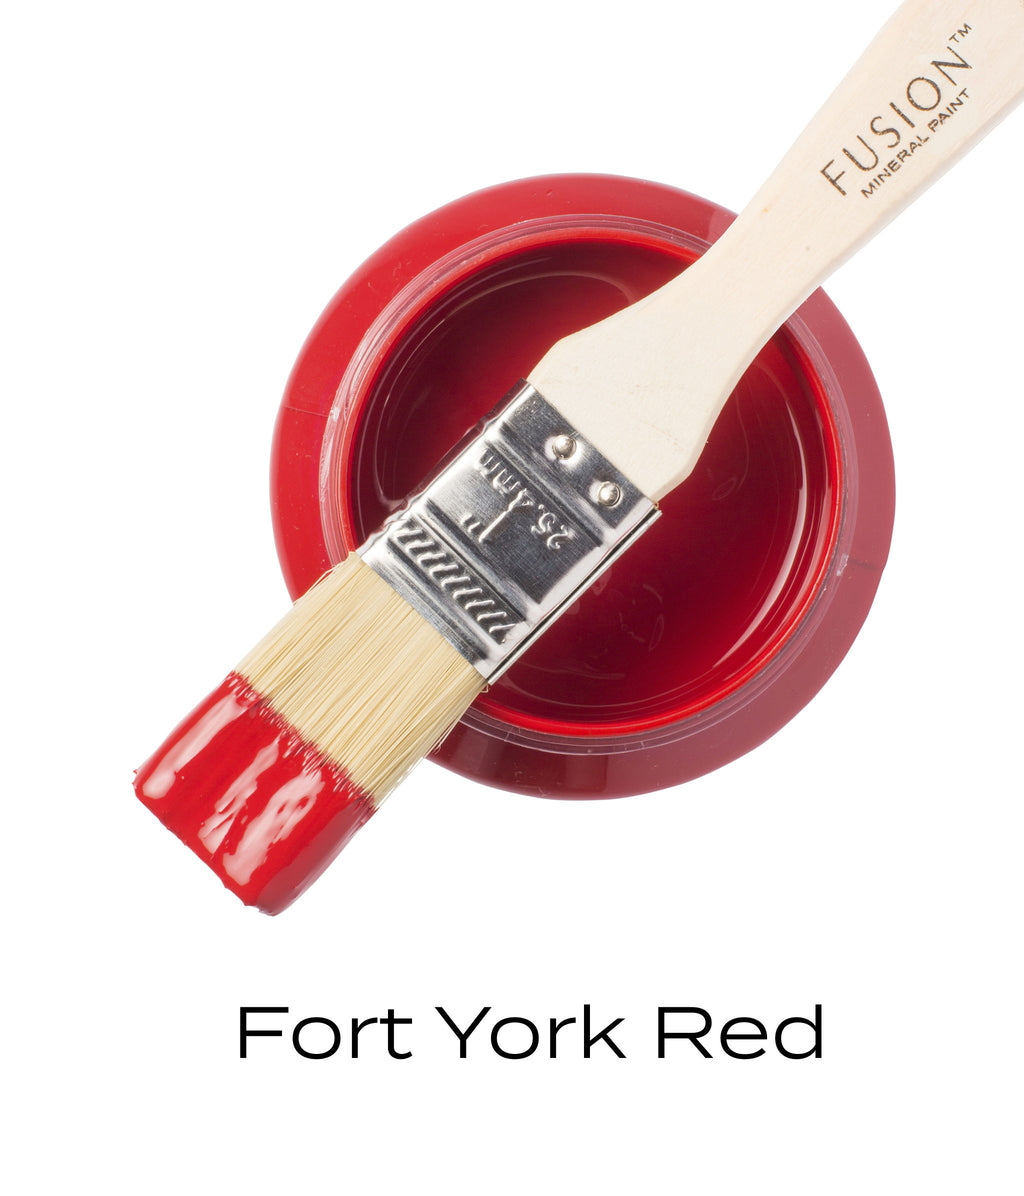 Fort York Red Fusion Mineral Paint Near Me